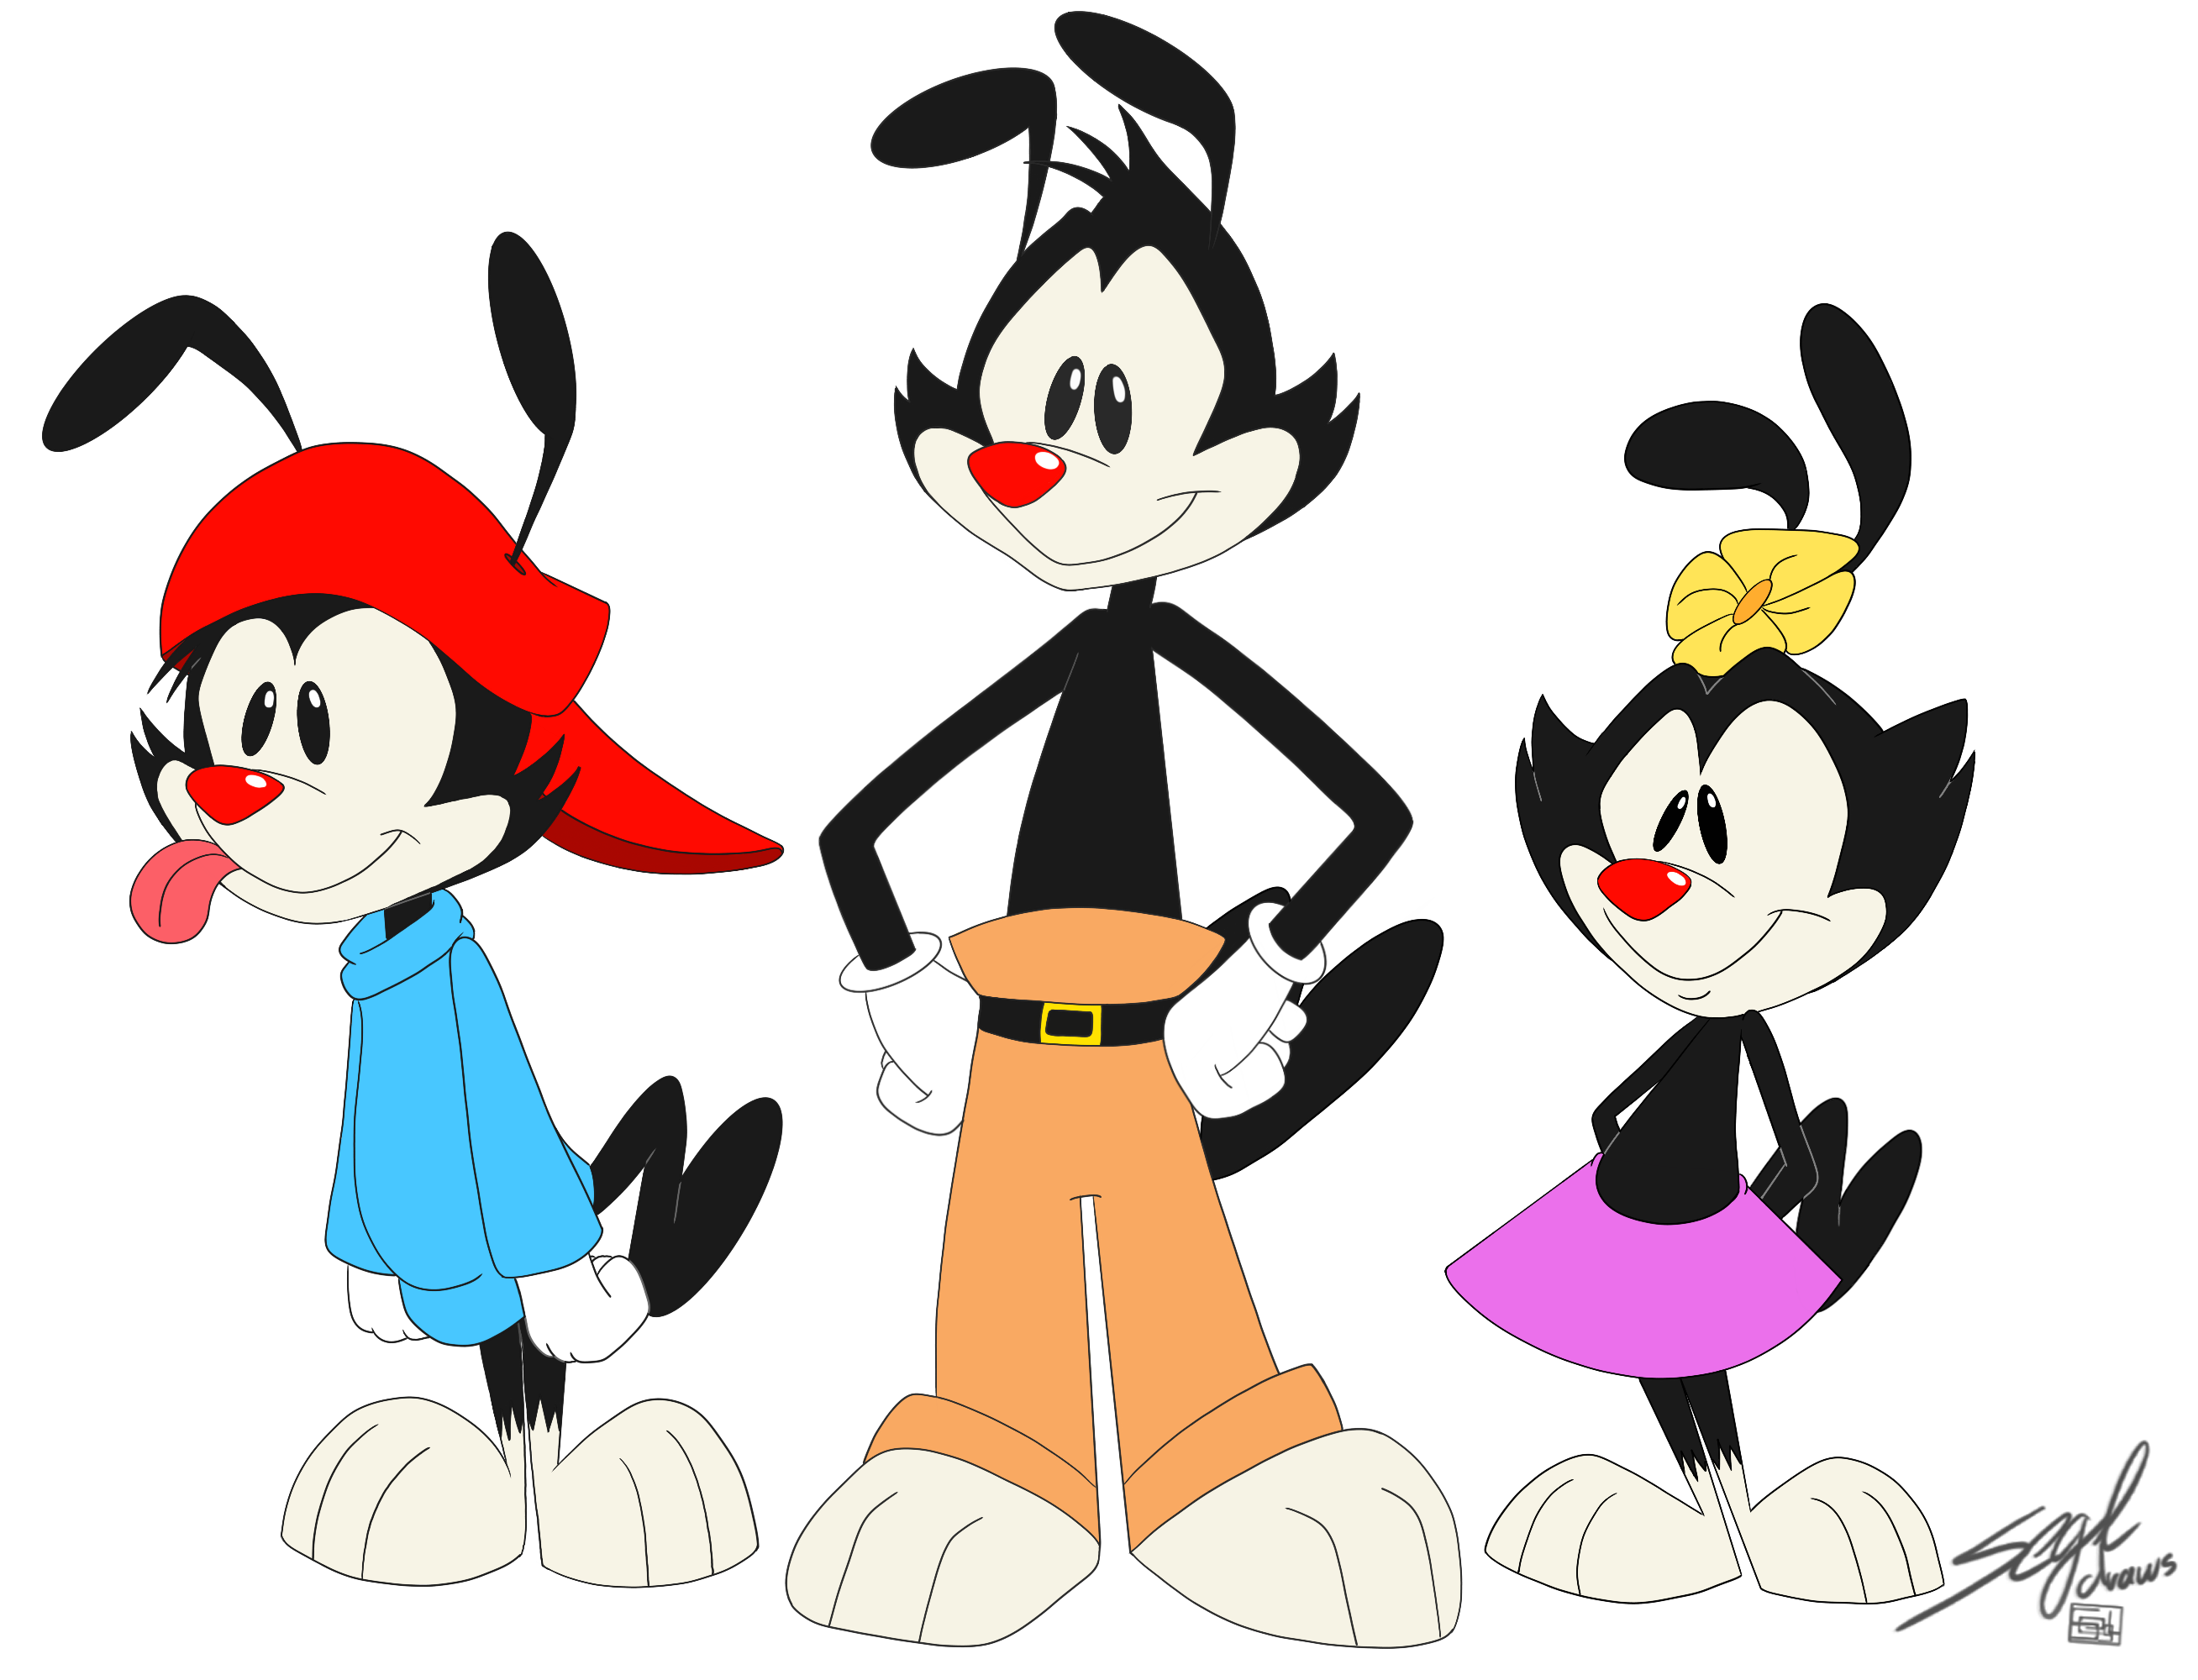 The lead characters of Animaniacs